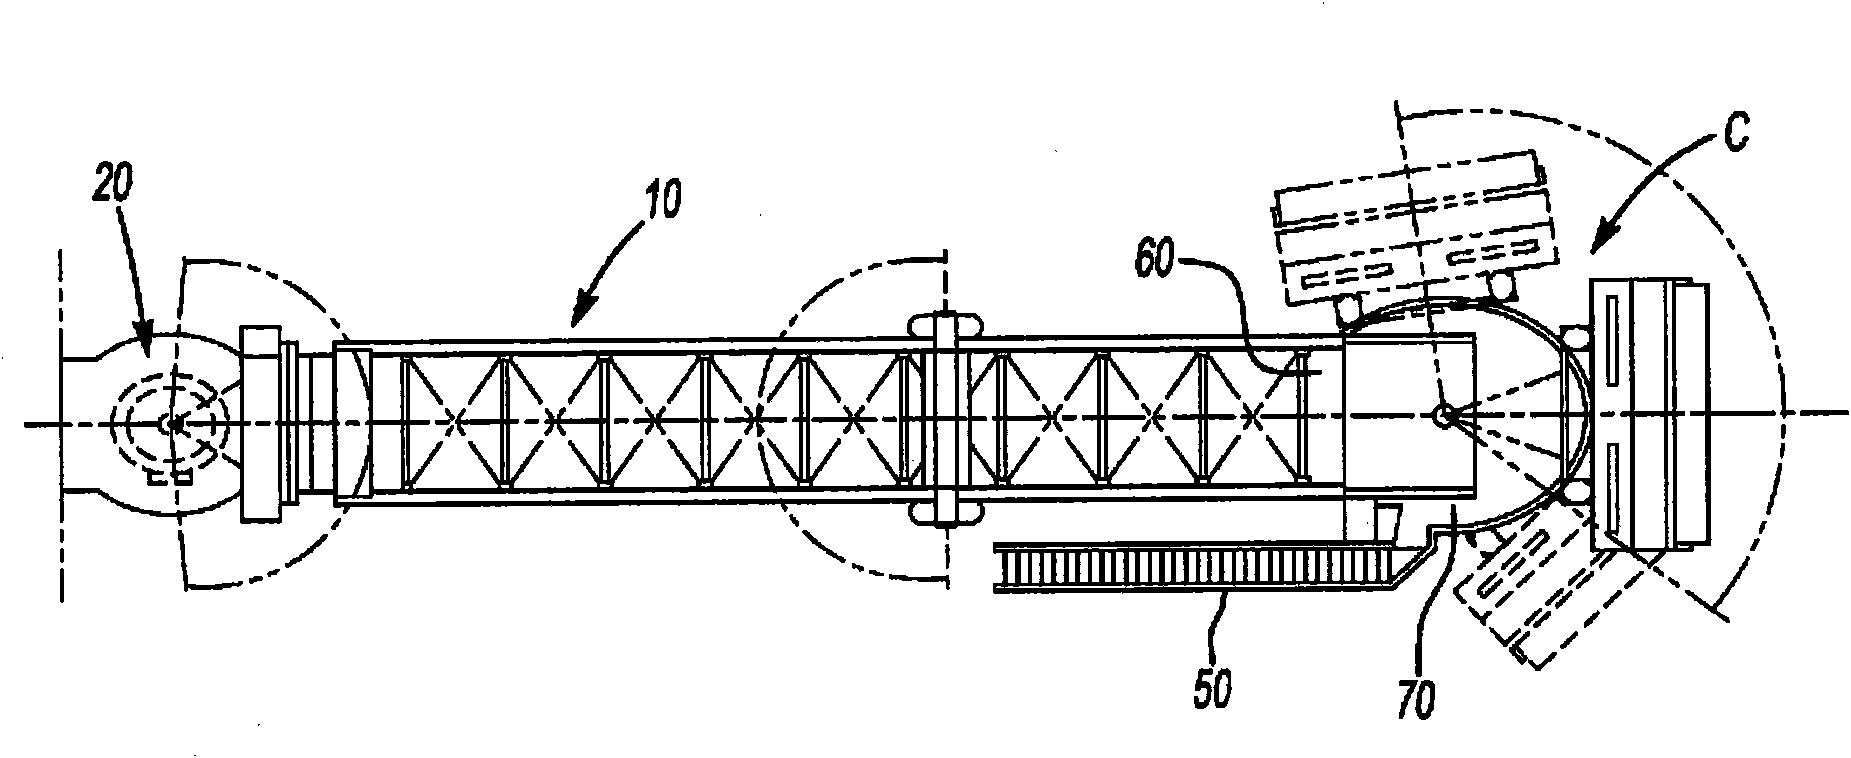 Osculating device for boarding bridge canopy